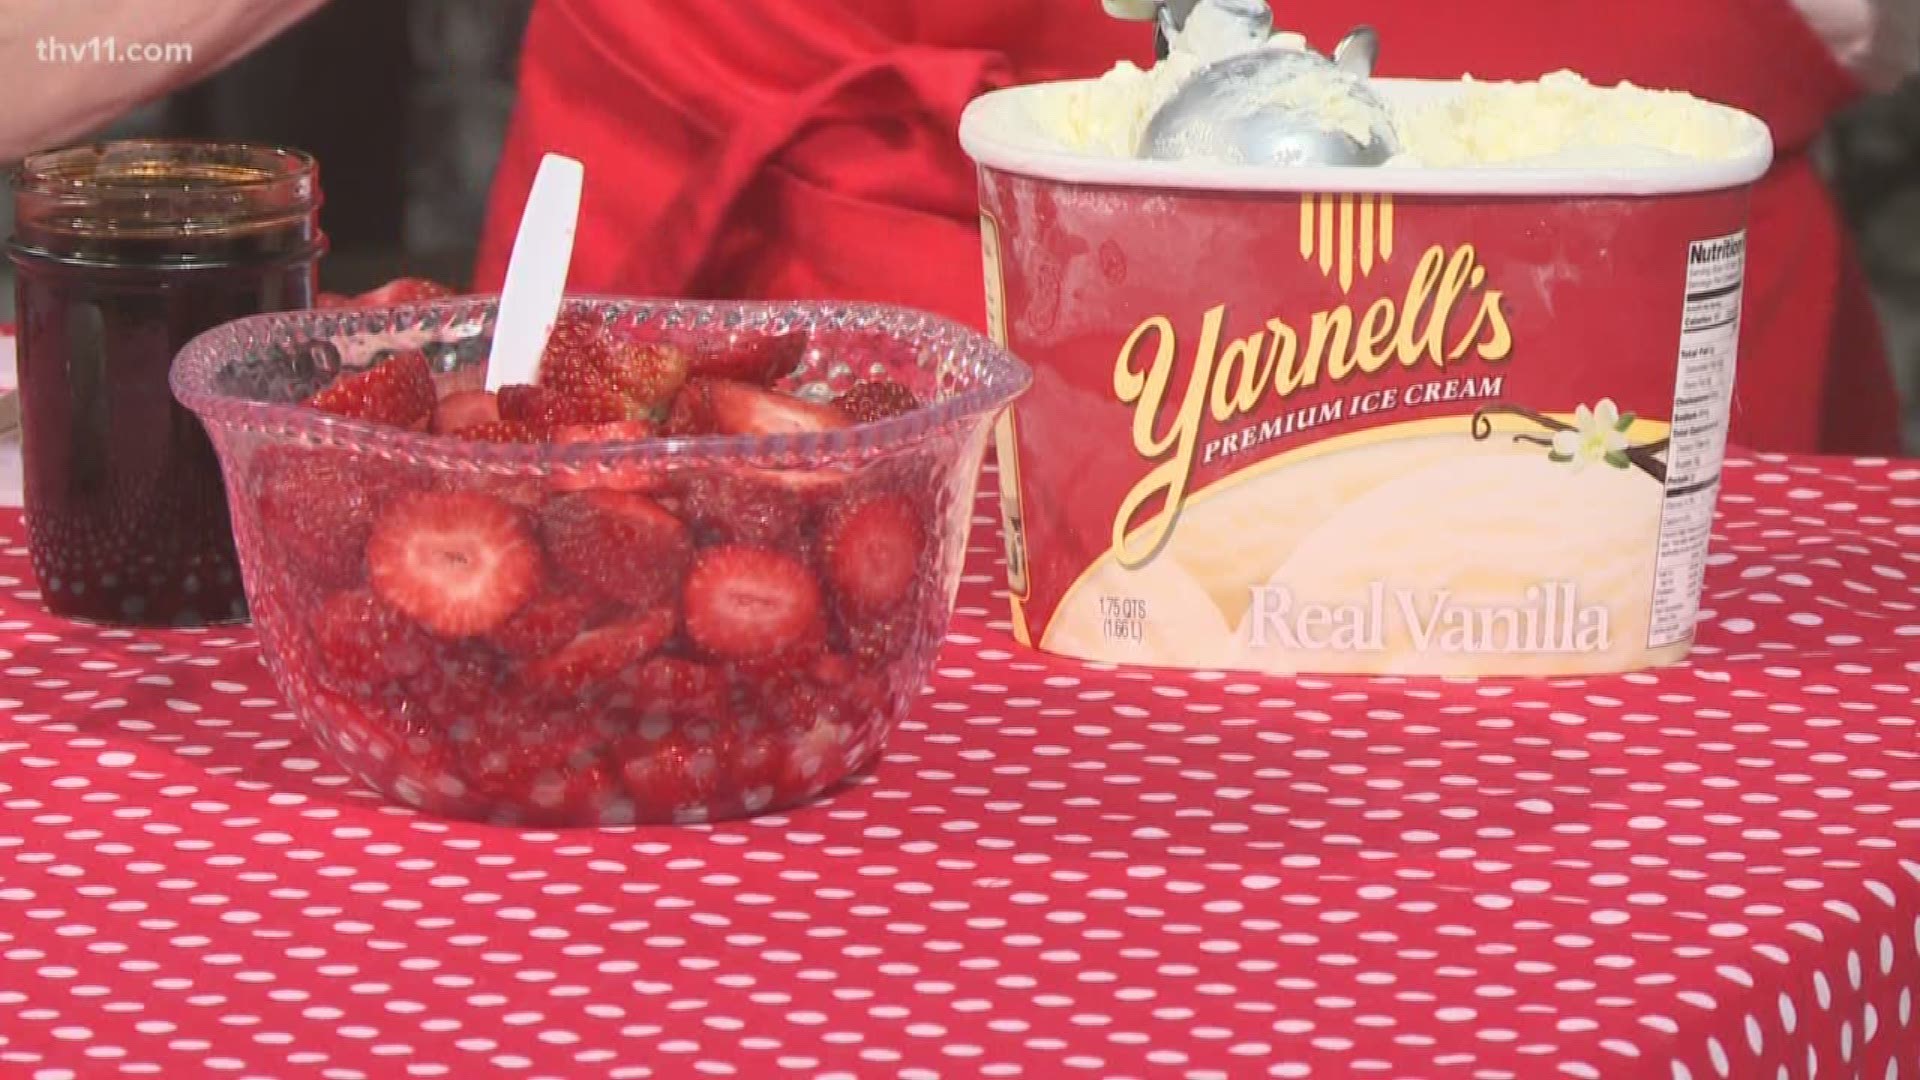 Debbie Arnold joins us this morning to cook up something delicious -- an easy strawberry dessert.